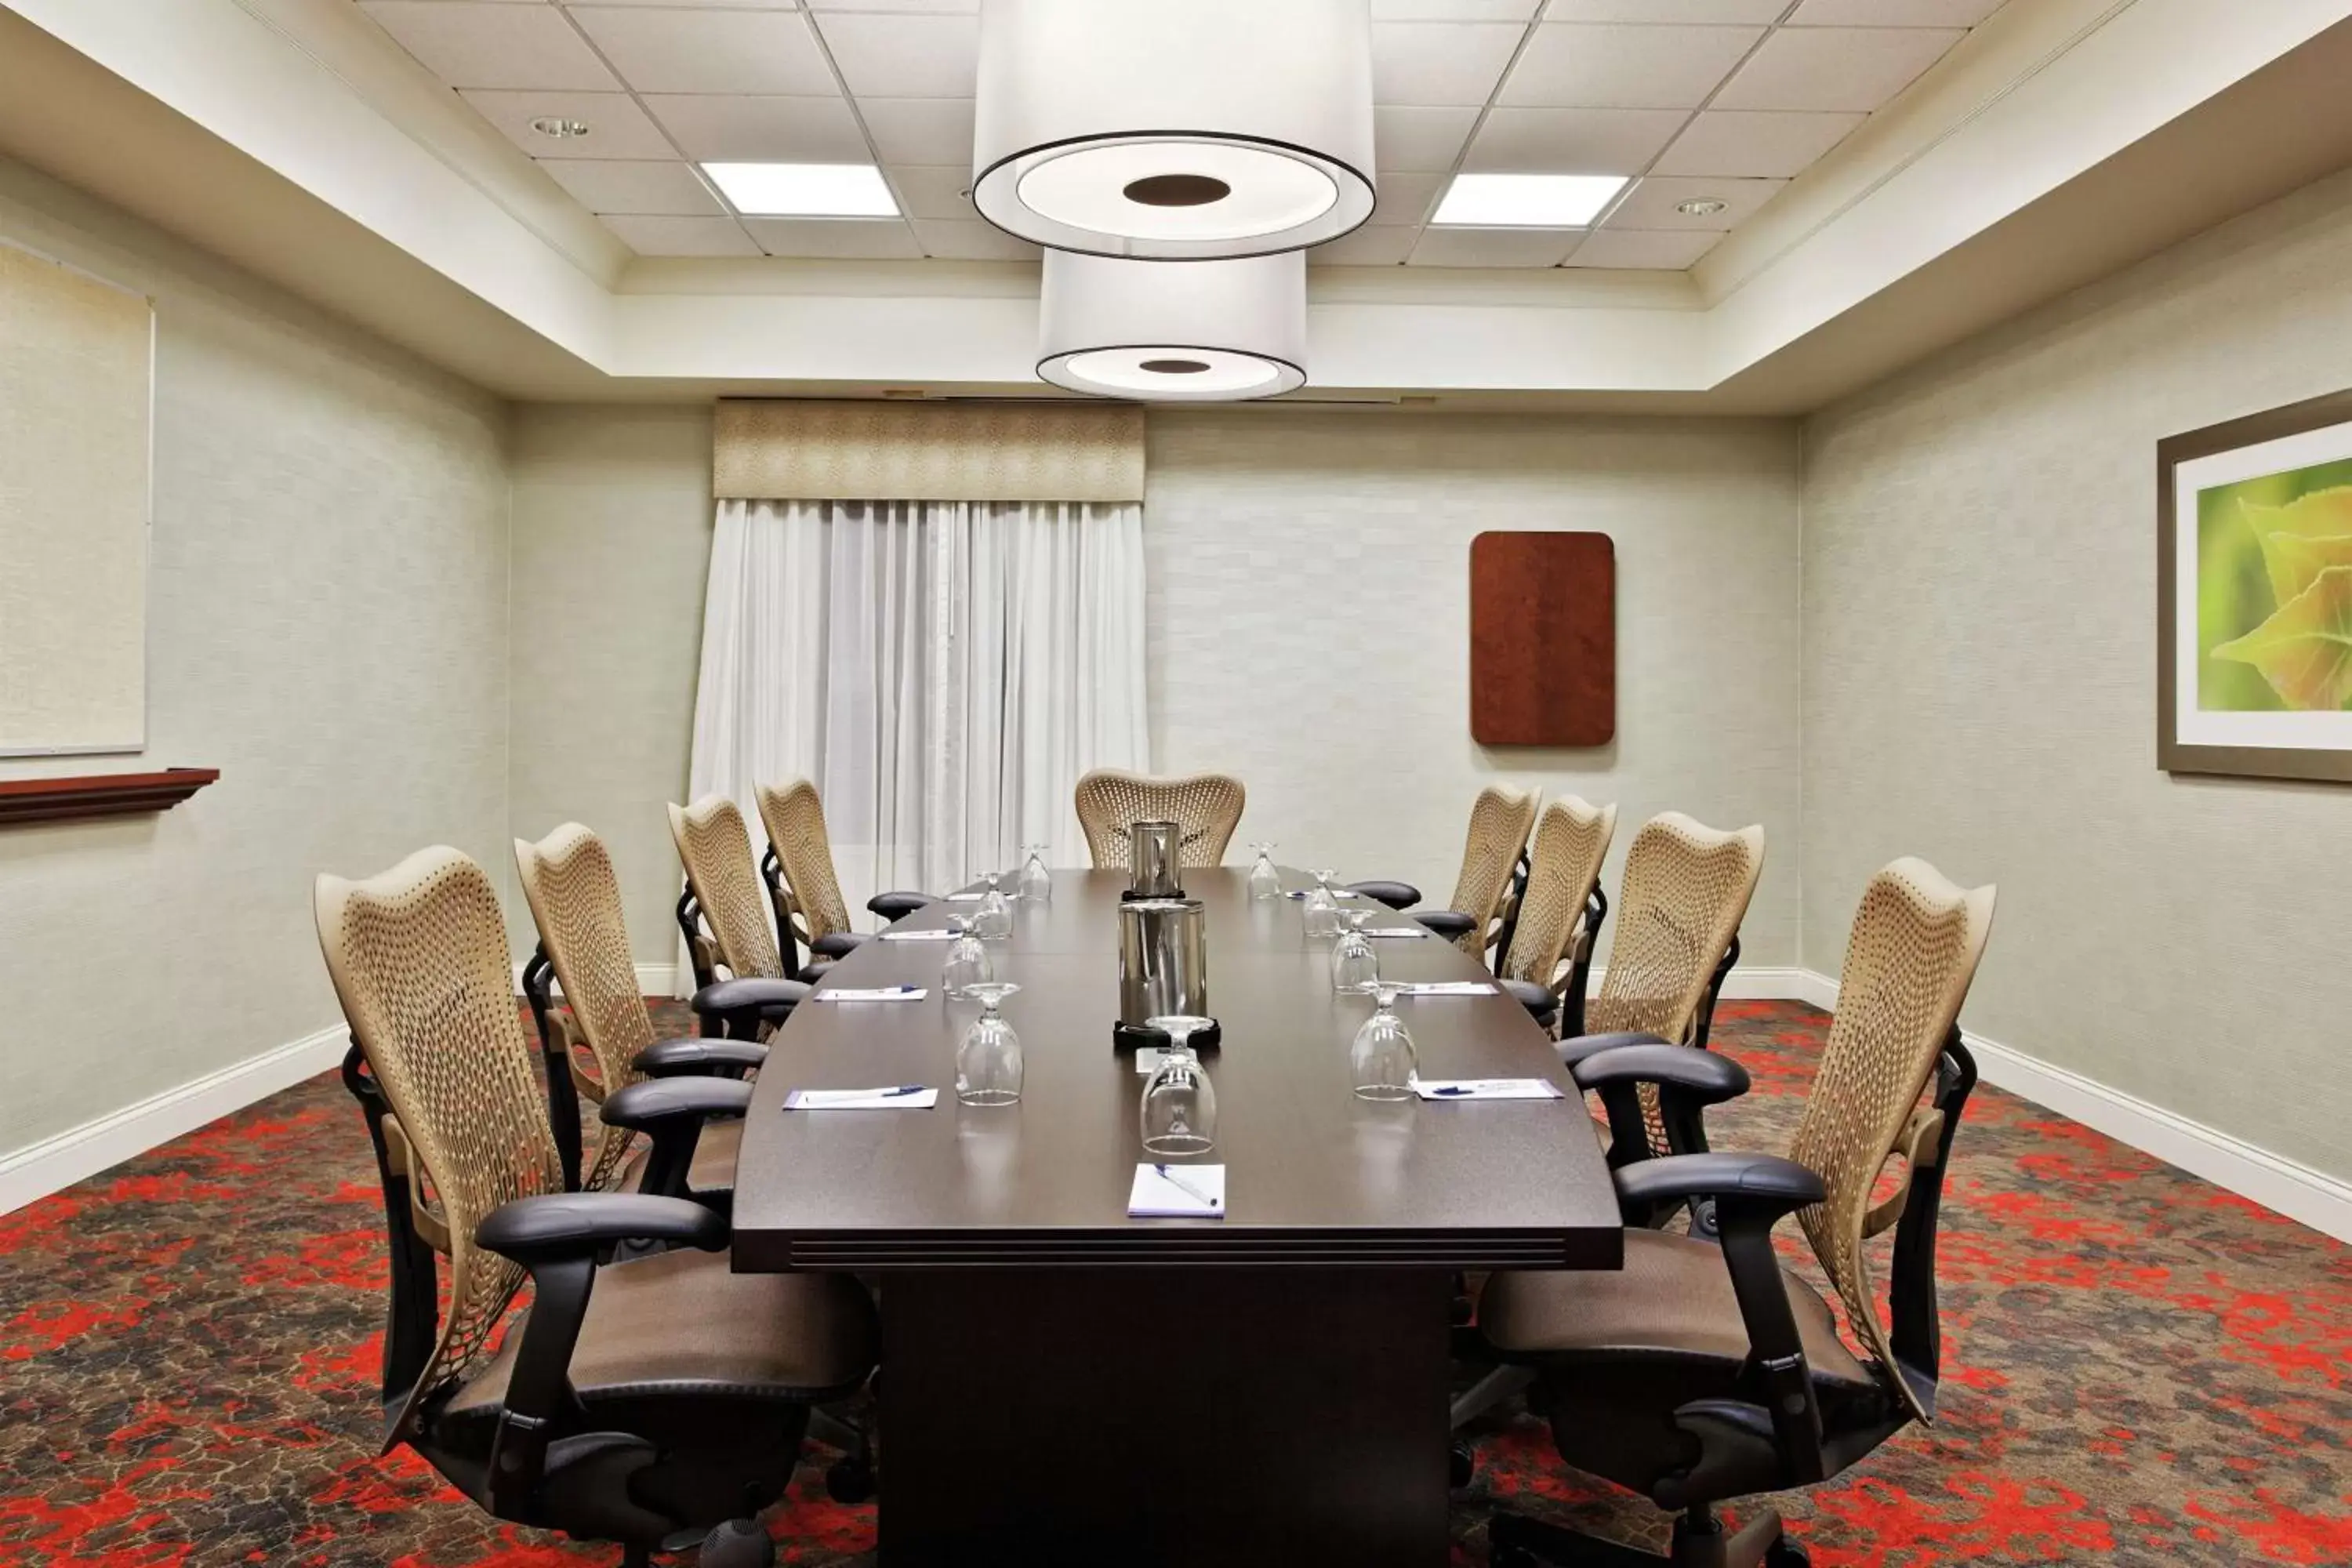 Meeting/conference room in Hilton Garden Inn Springfield, IL